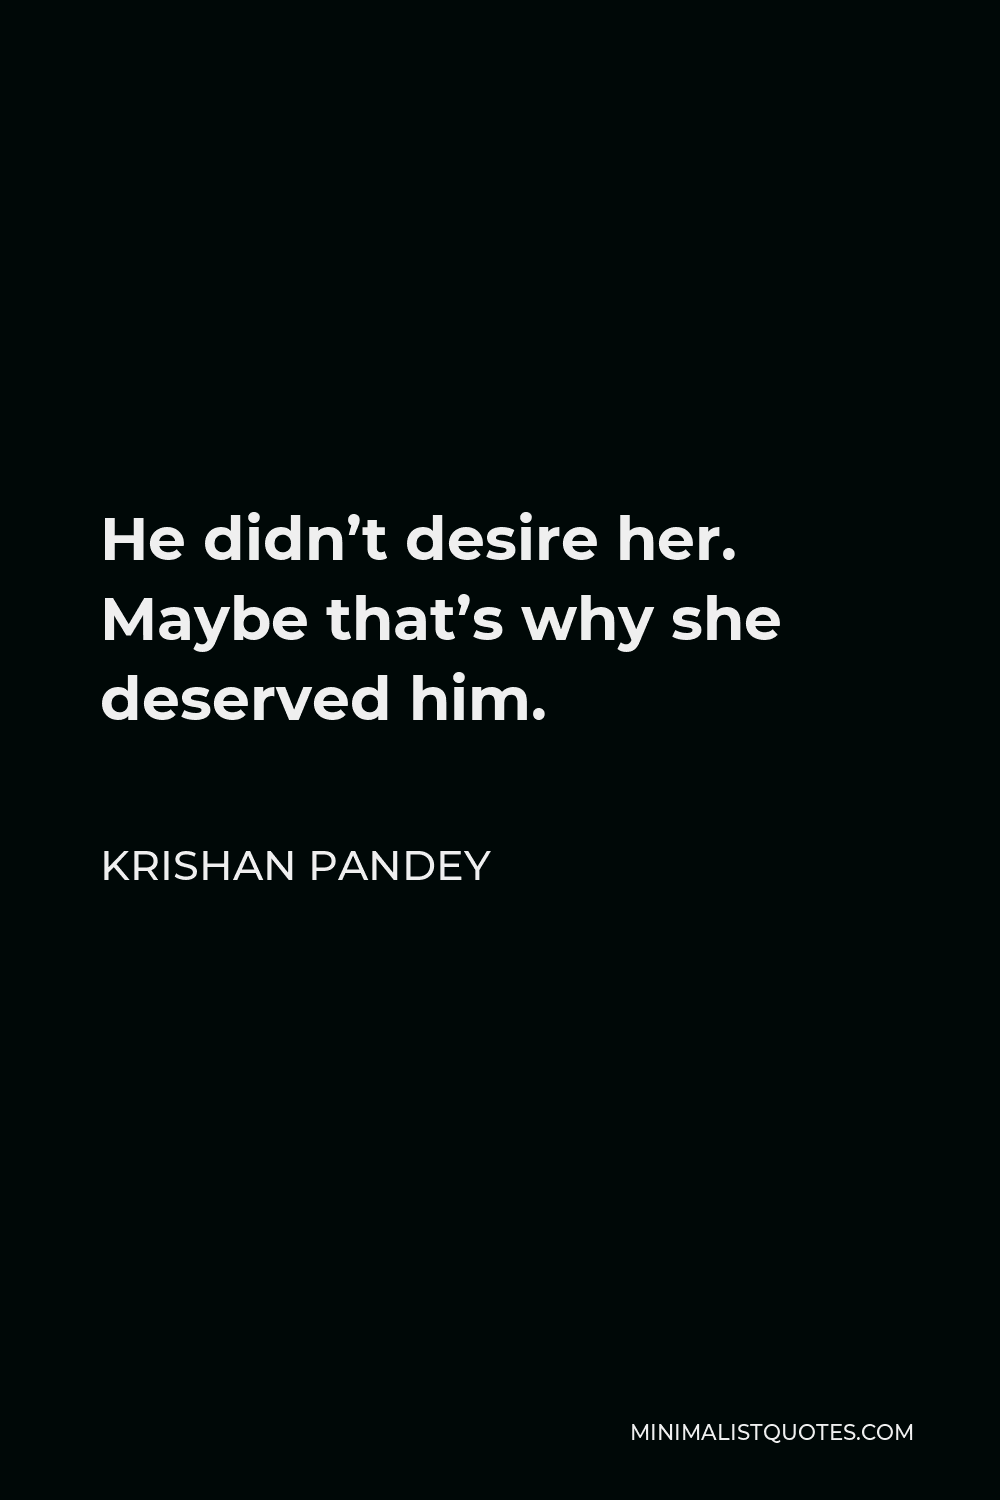 Krishan Pandey Quote - He didn’t desire her. Maybe that’s why she deserved him.